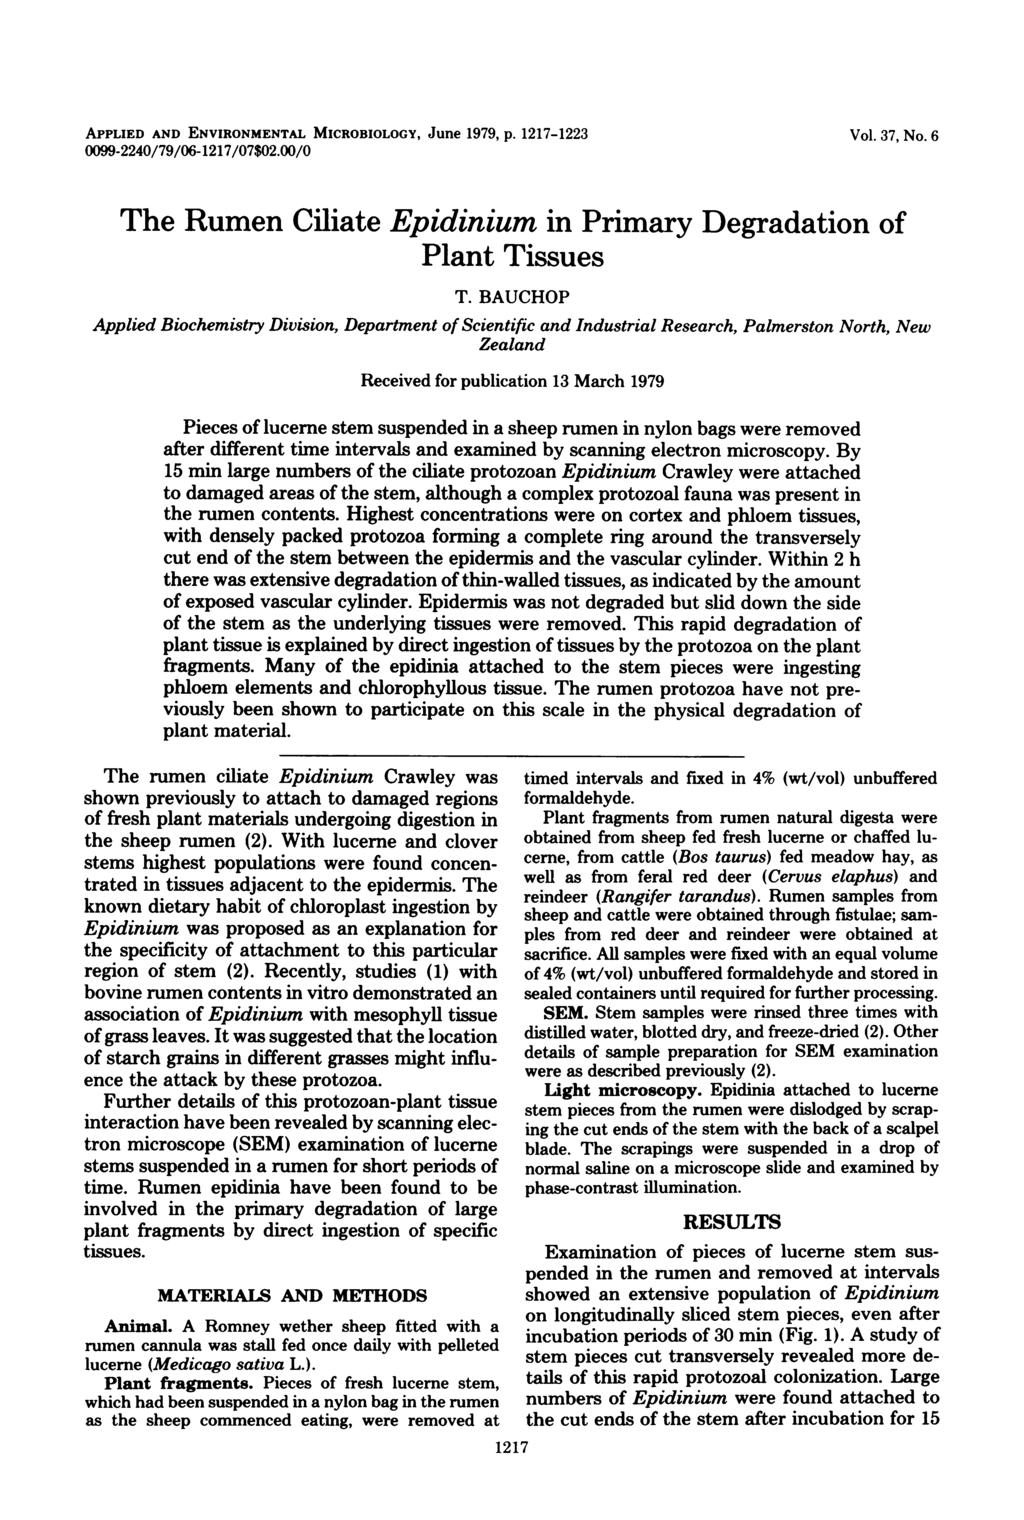 APPLIED AND ENVIRONMENTAL MICROBIOLOGY, June 1979, p. 1217-1223 0099-2240/79/06-1217/07$02.00/0 Vol. 37, No. 6 The Rumen Ciliate Epidinium in Primary Degradation of Plant Tissues T.